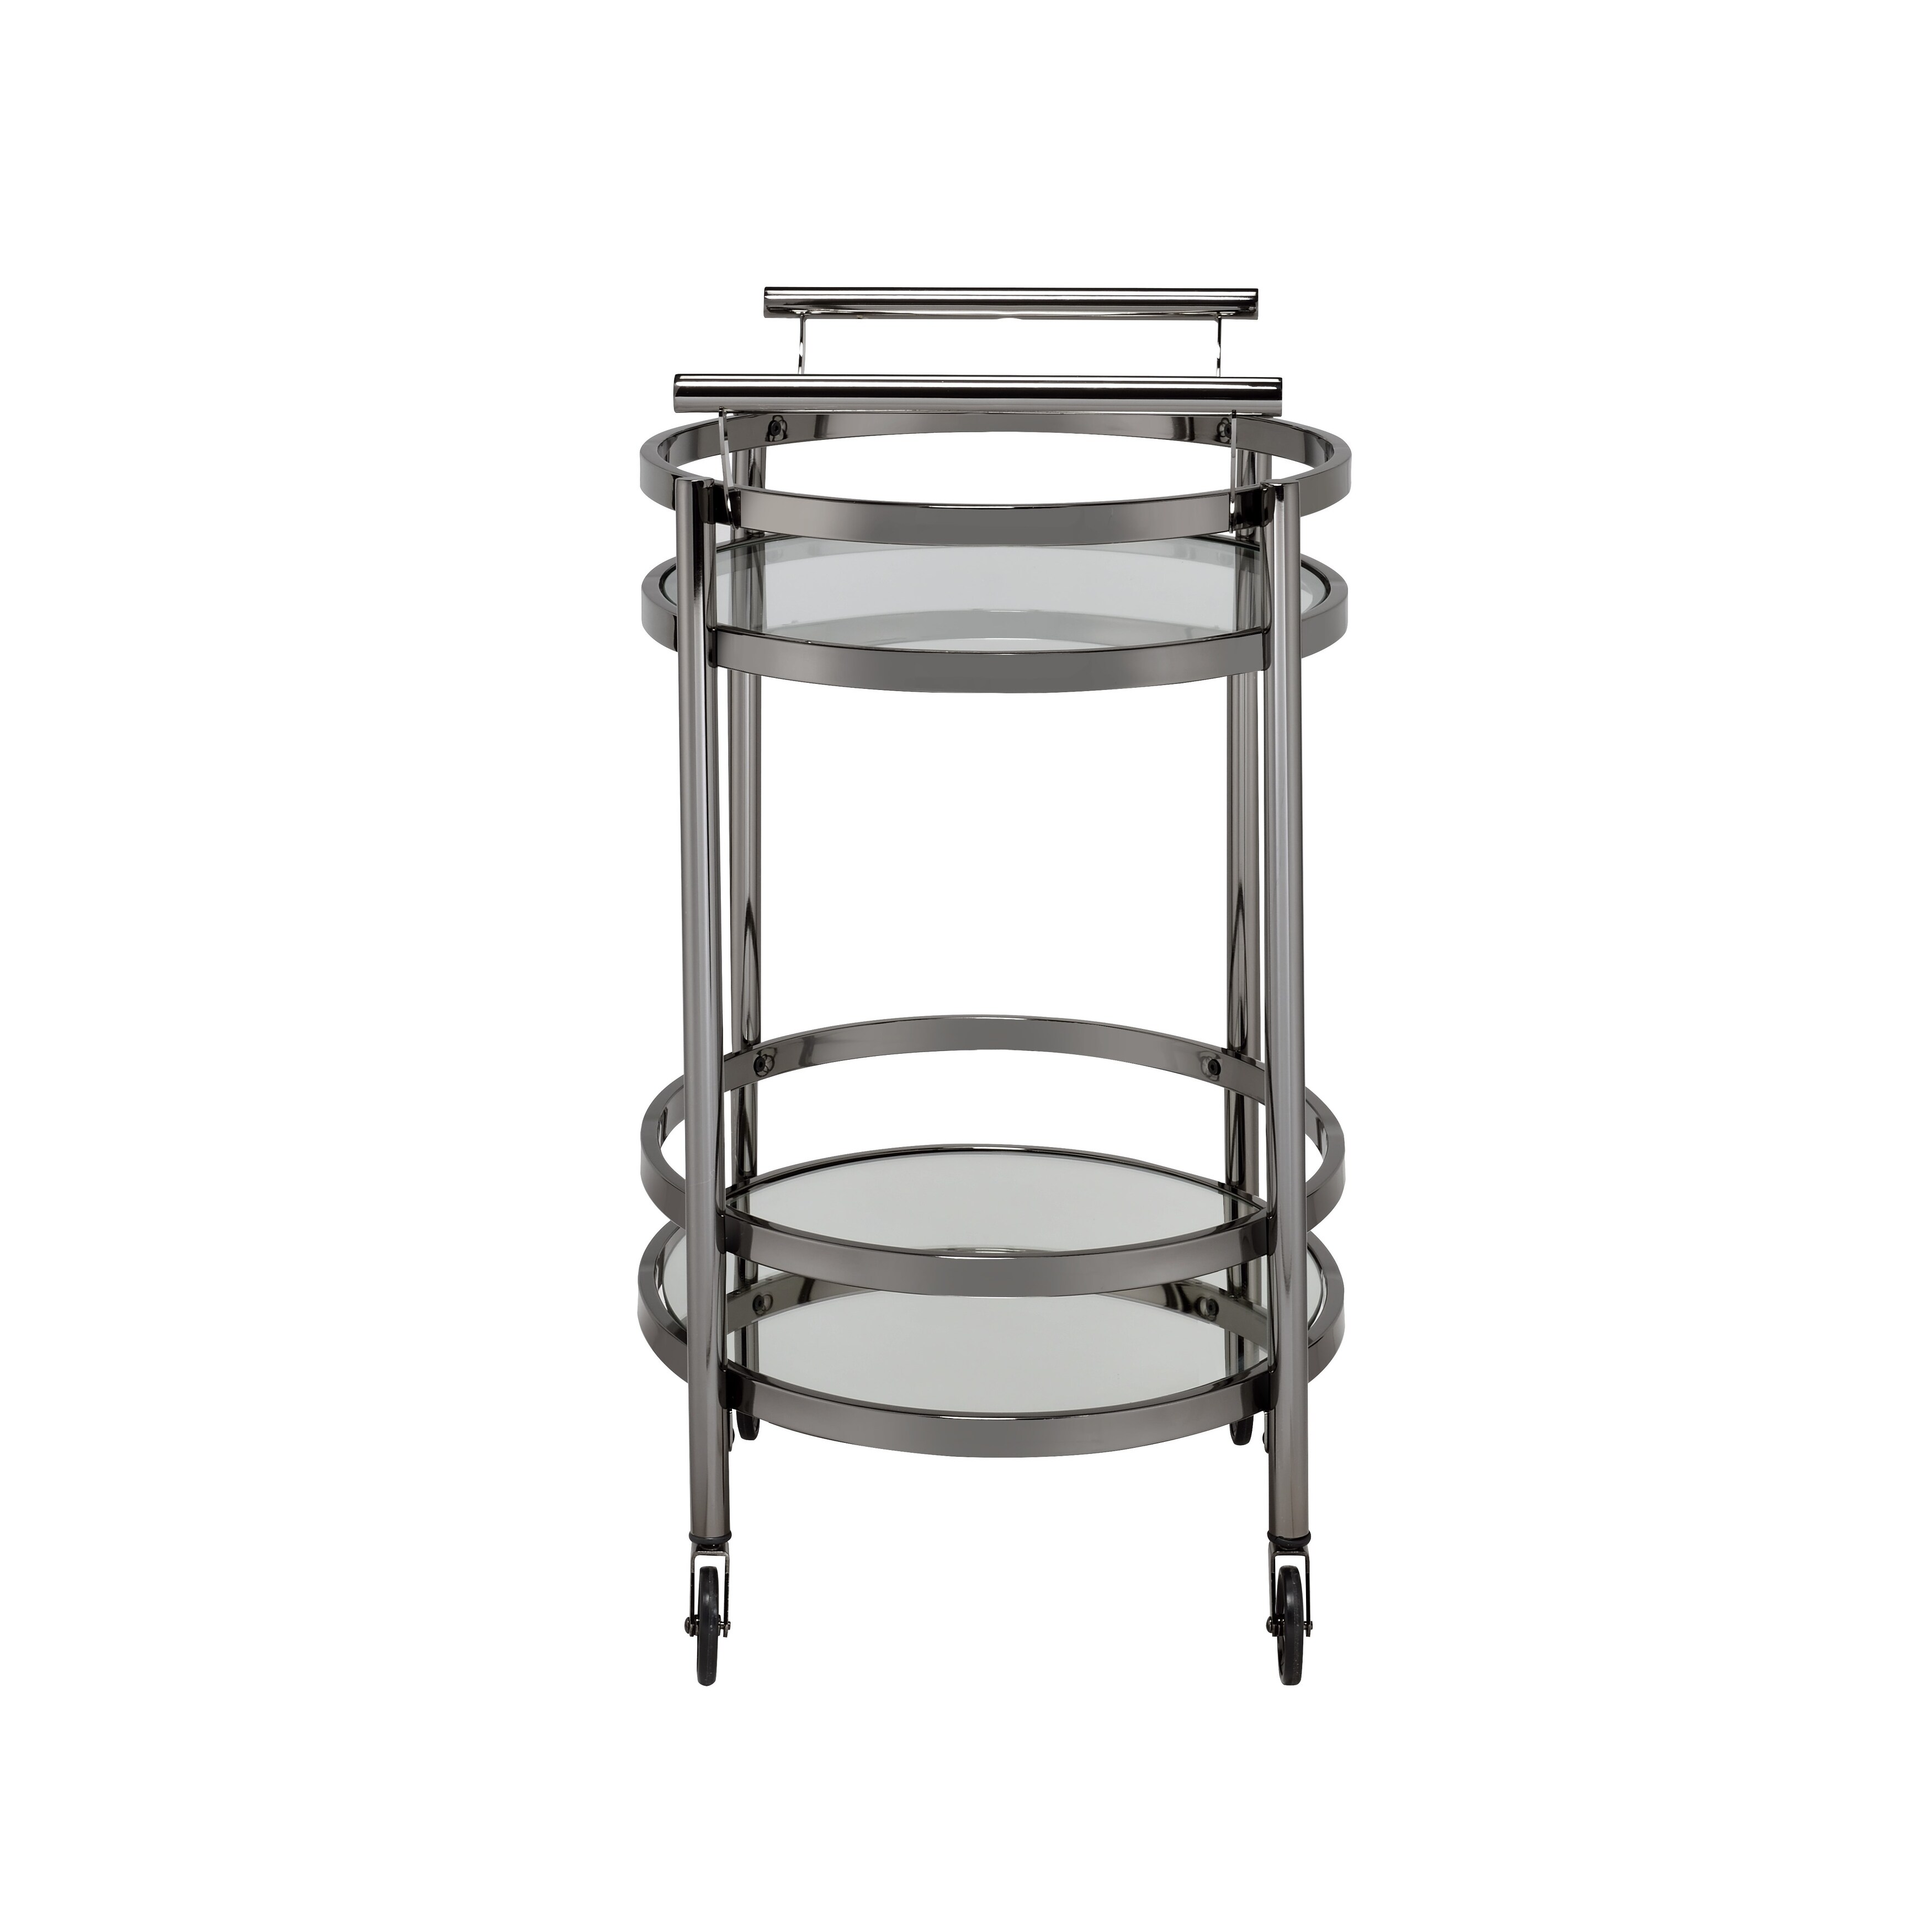 ACME Lakelyn Glass Serving Cart in Multicolor